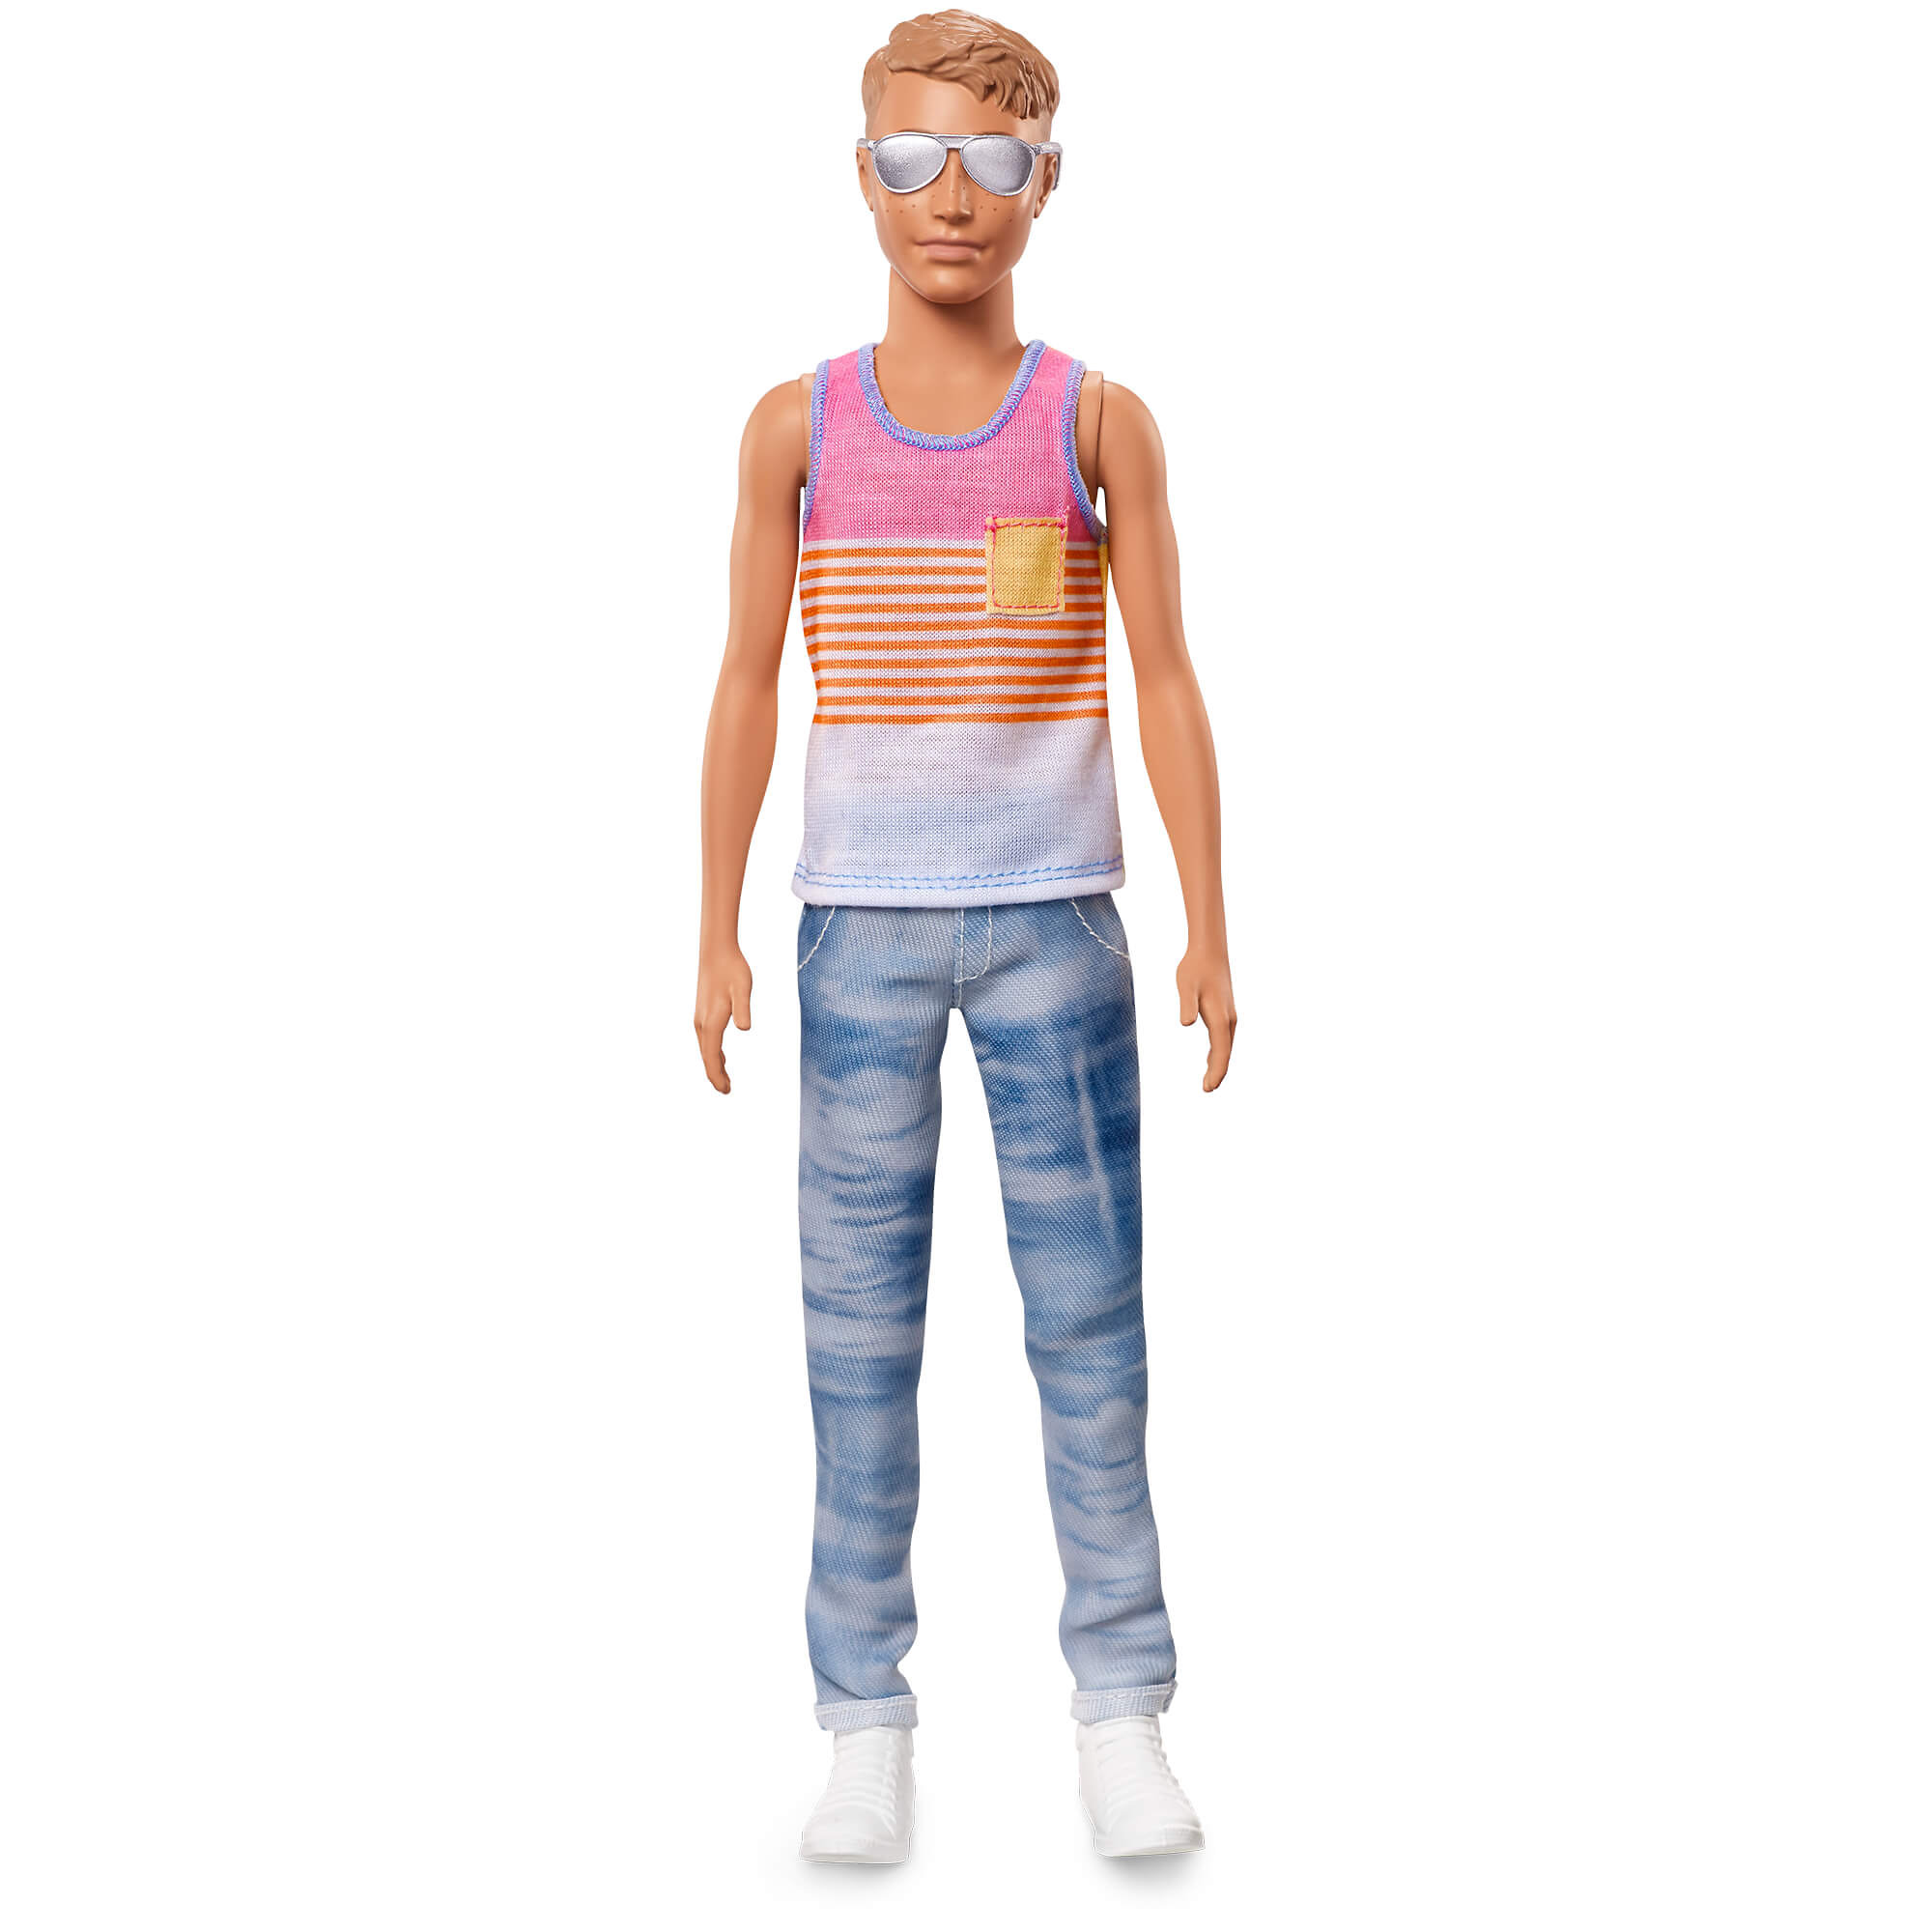 Barbie Ken Fashionistas Hyped On Stripes Fashion Doll Playset, 5 Pieces Included - image 1 of 3